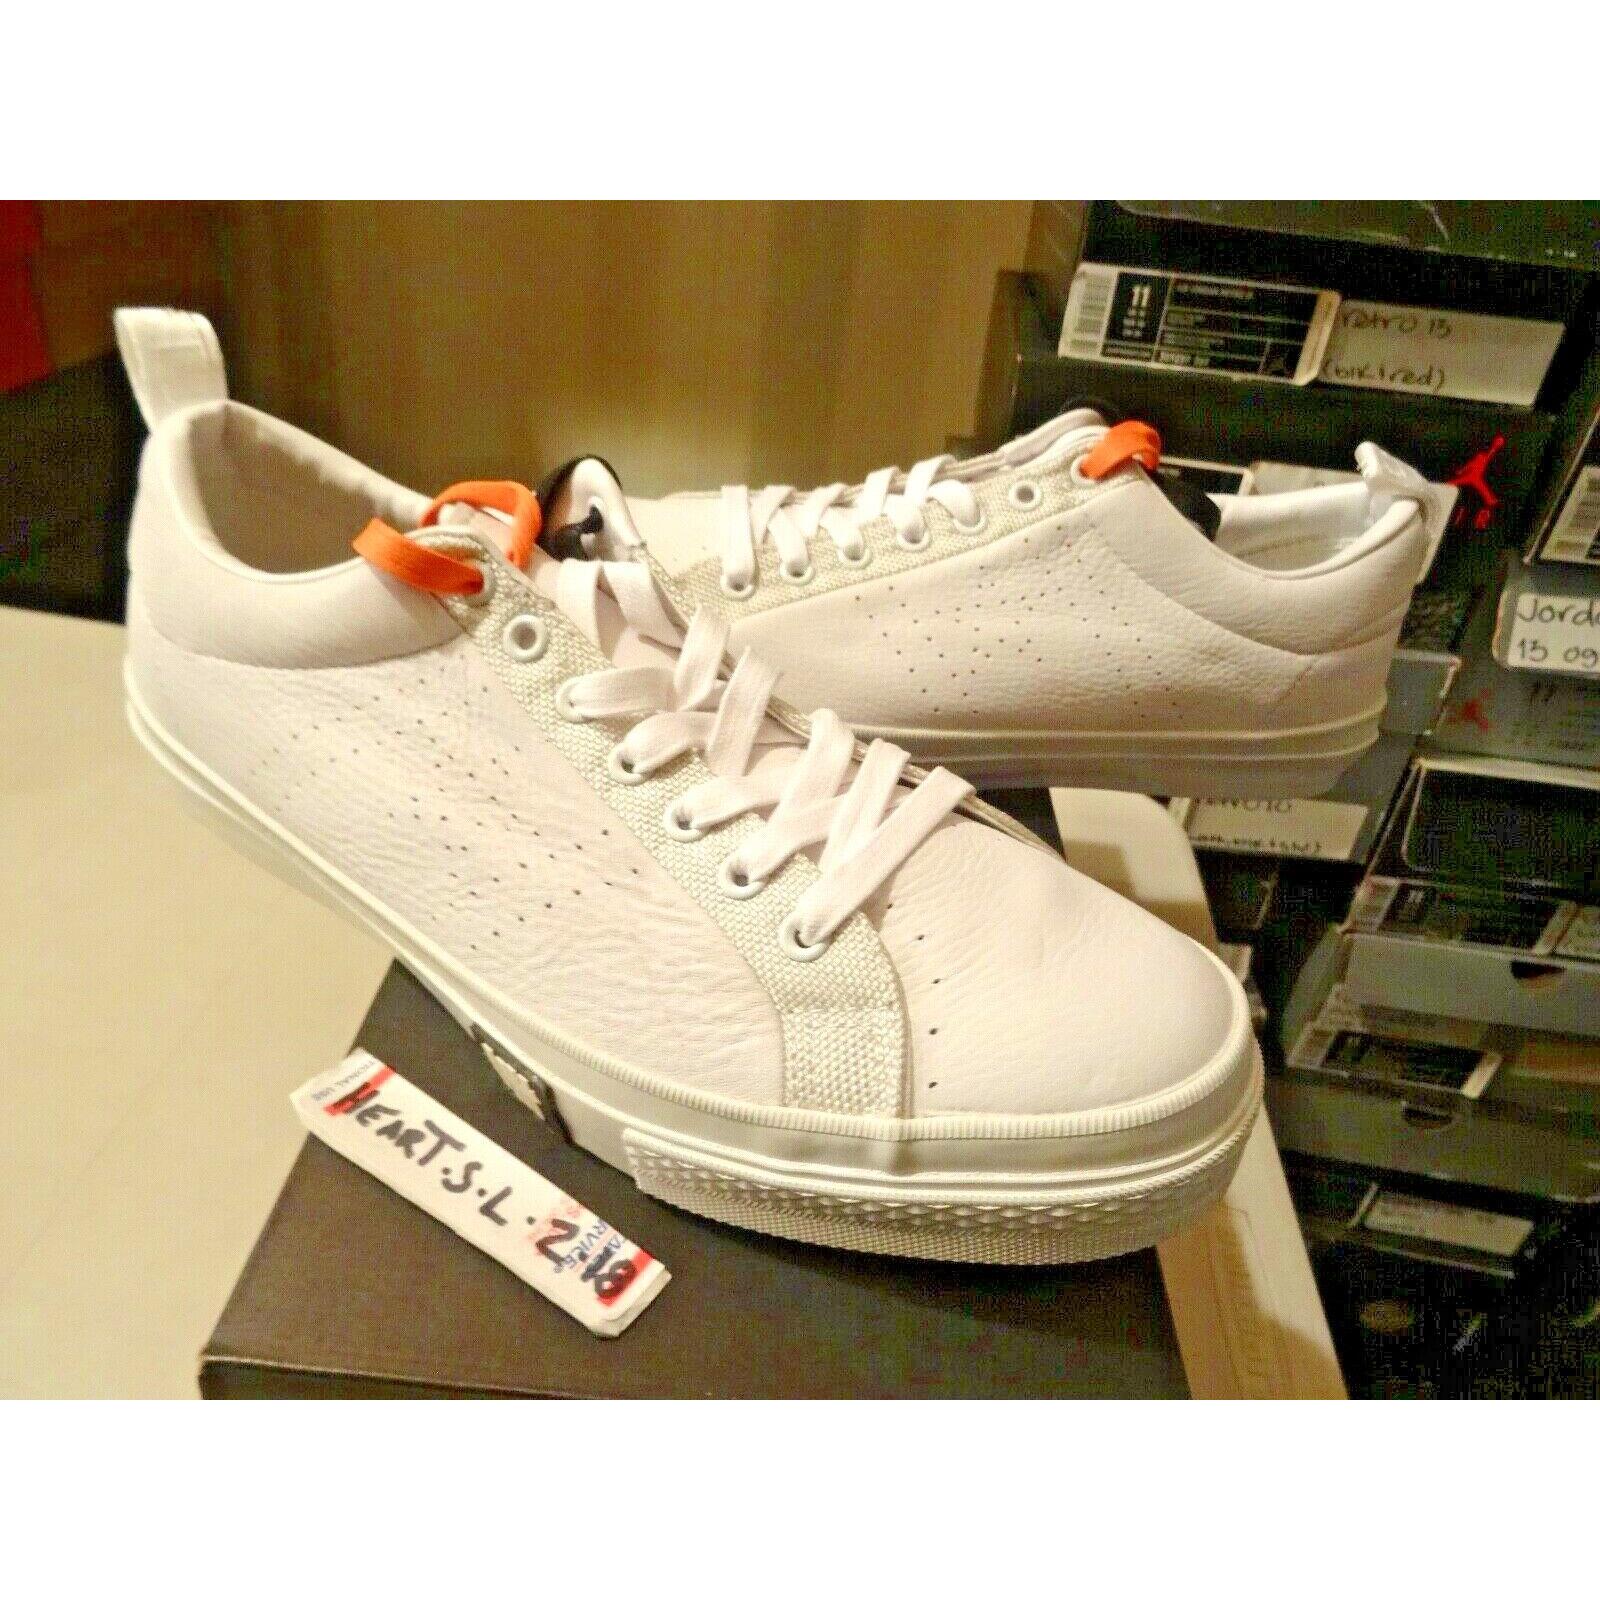 Converse X Undefeated OS Academy OX Undftd White 124947 SZ 11.5